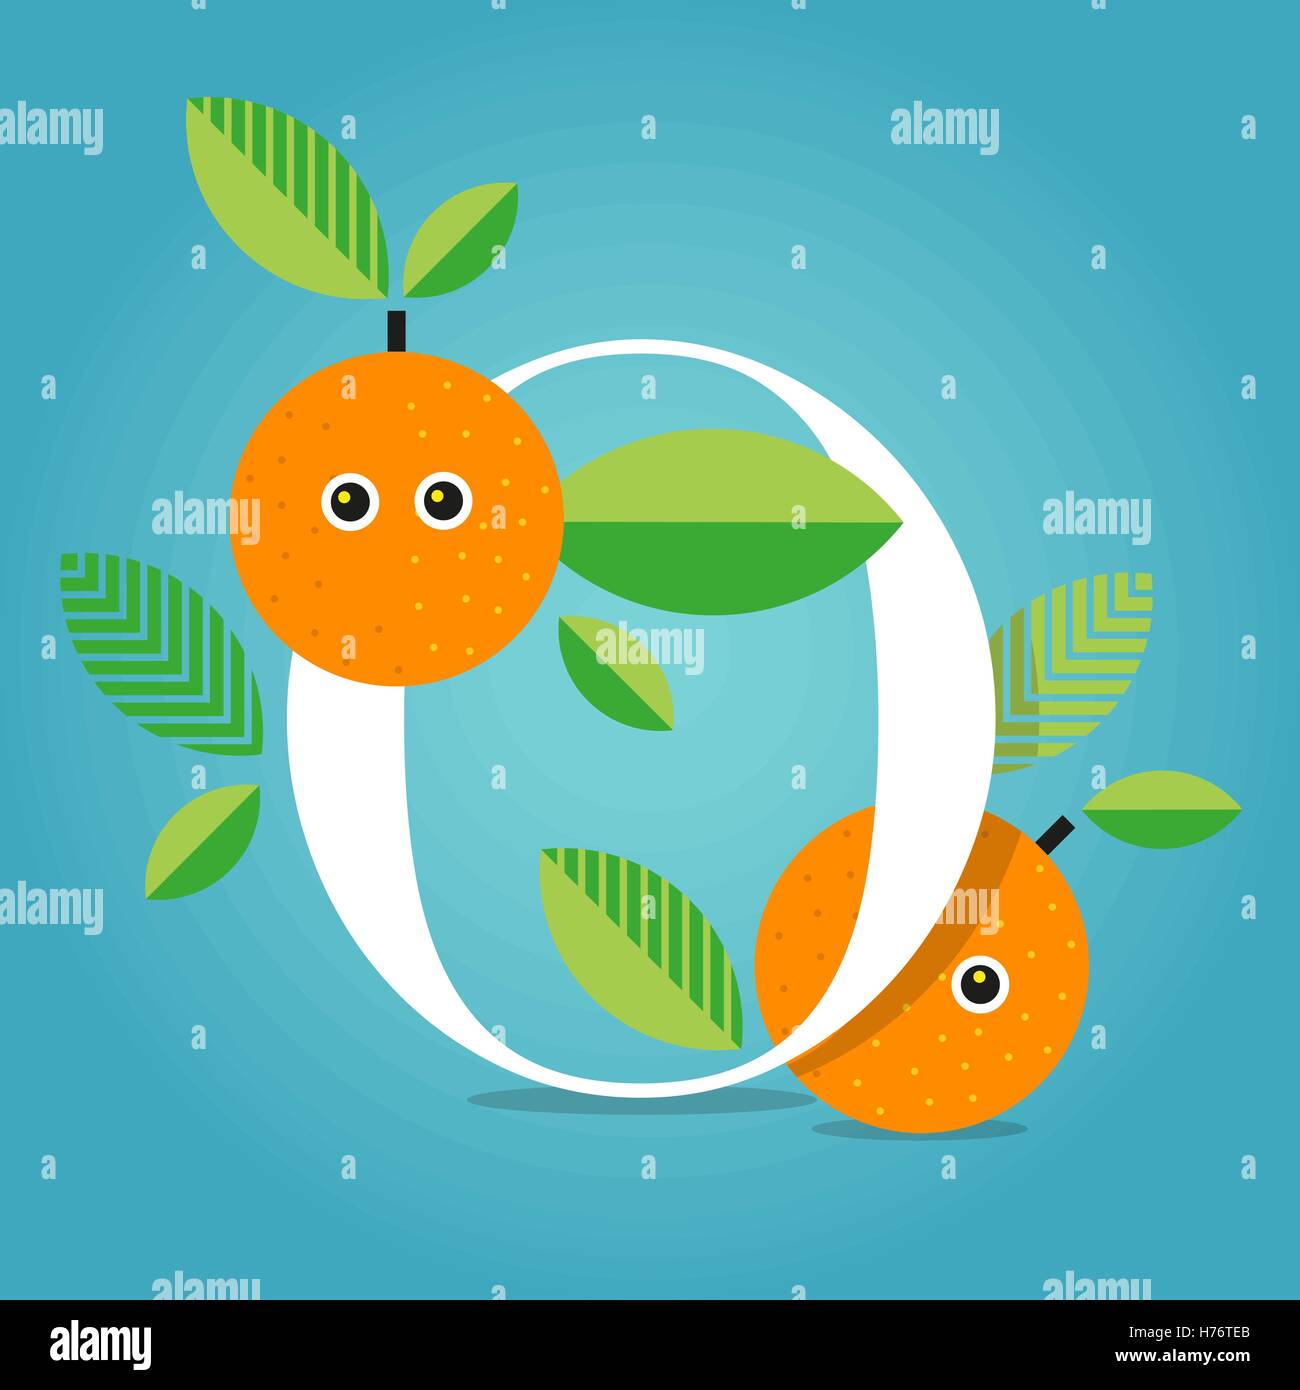 Colorful flat vector illustration of initial alphabet letter O with oranges, leaves and gradient background Stock Vector